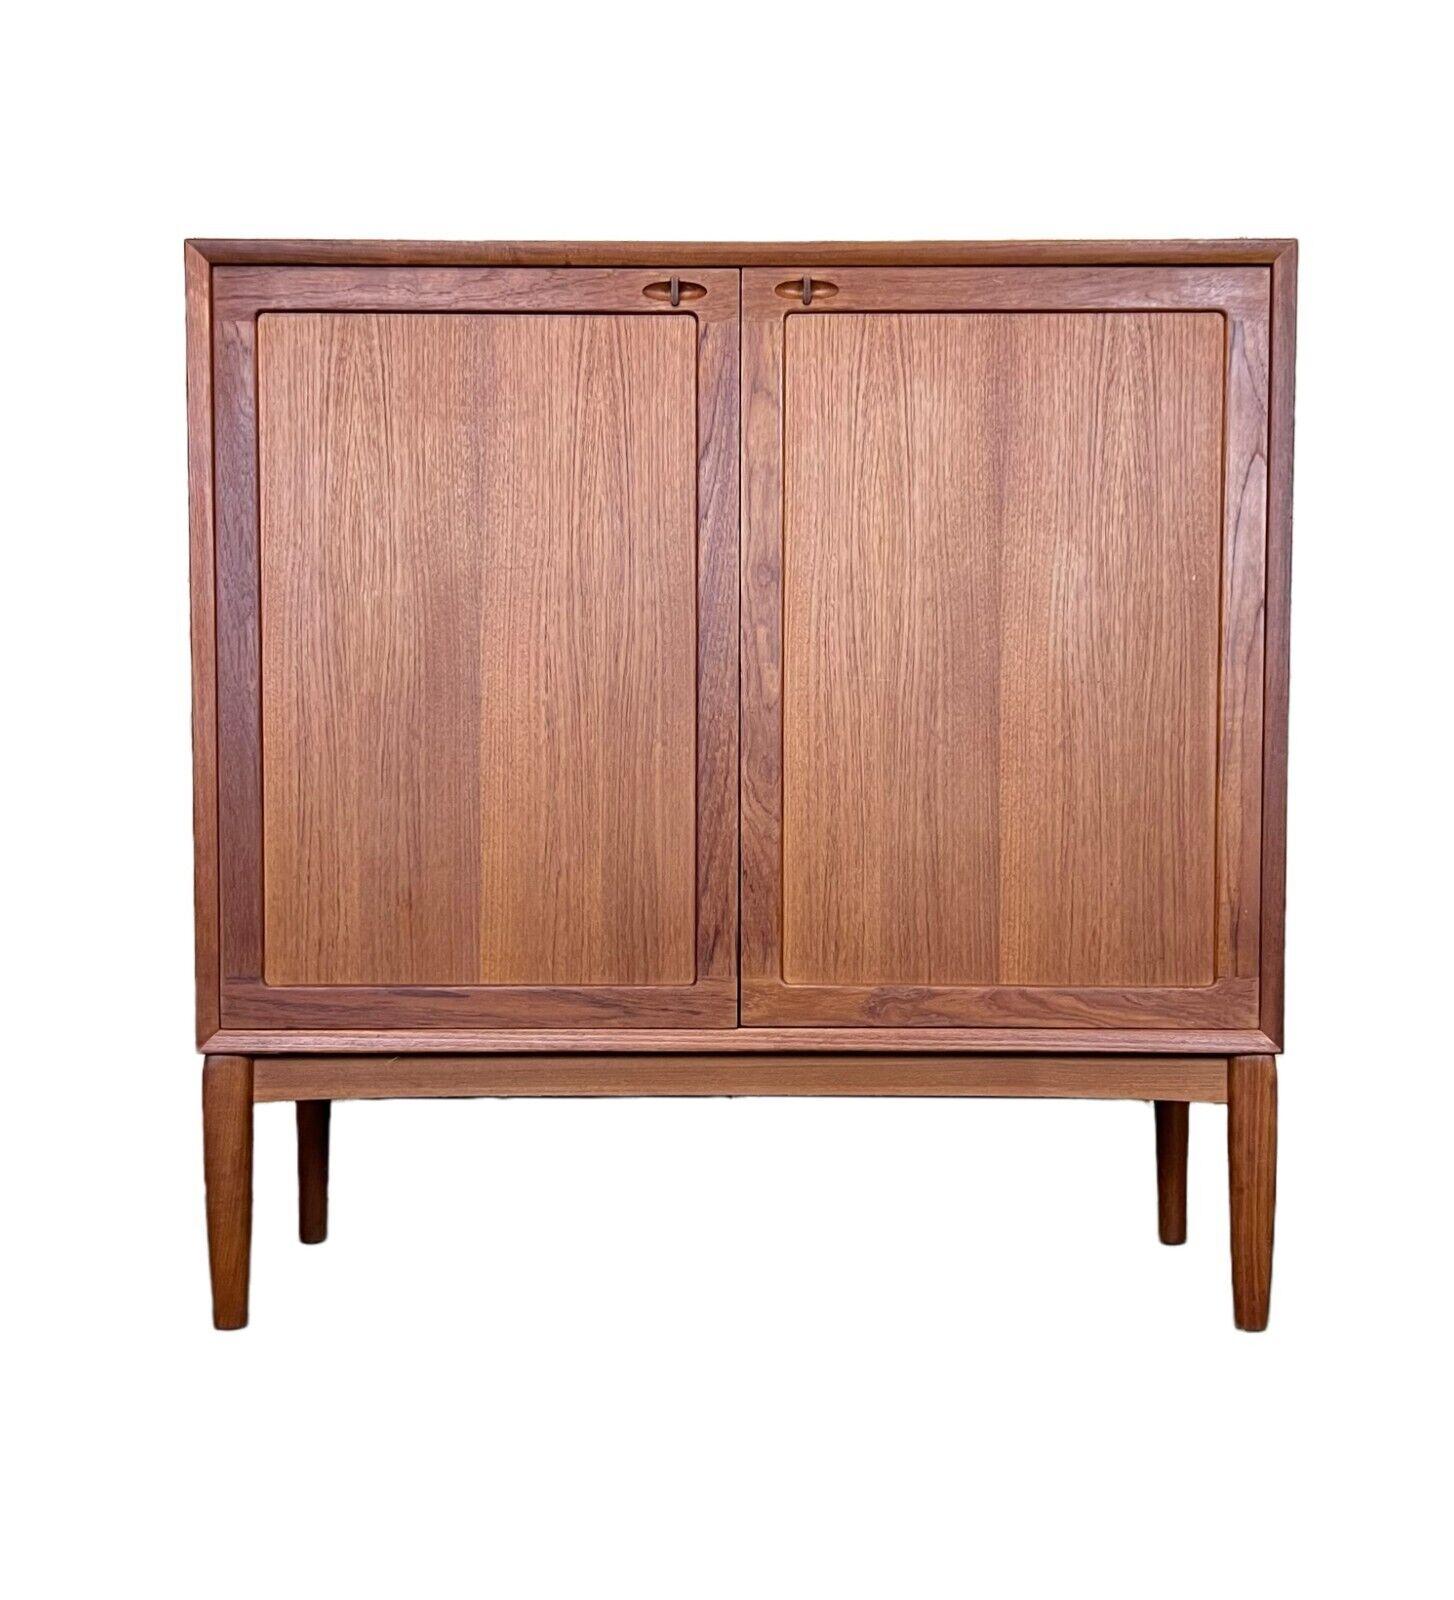 60s 70s teak sideboard highboard H.W Klein for Bramin Danish Design

Object: sideboard

Manufacturer: Bramin

Condition: good

Age: around 1960-1970

Dimensions:

Width = 124.5cm
Depth = 45cm
Height = 124cm

Other notes:

The